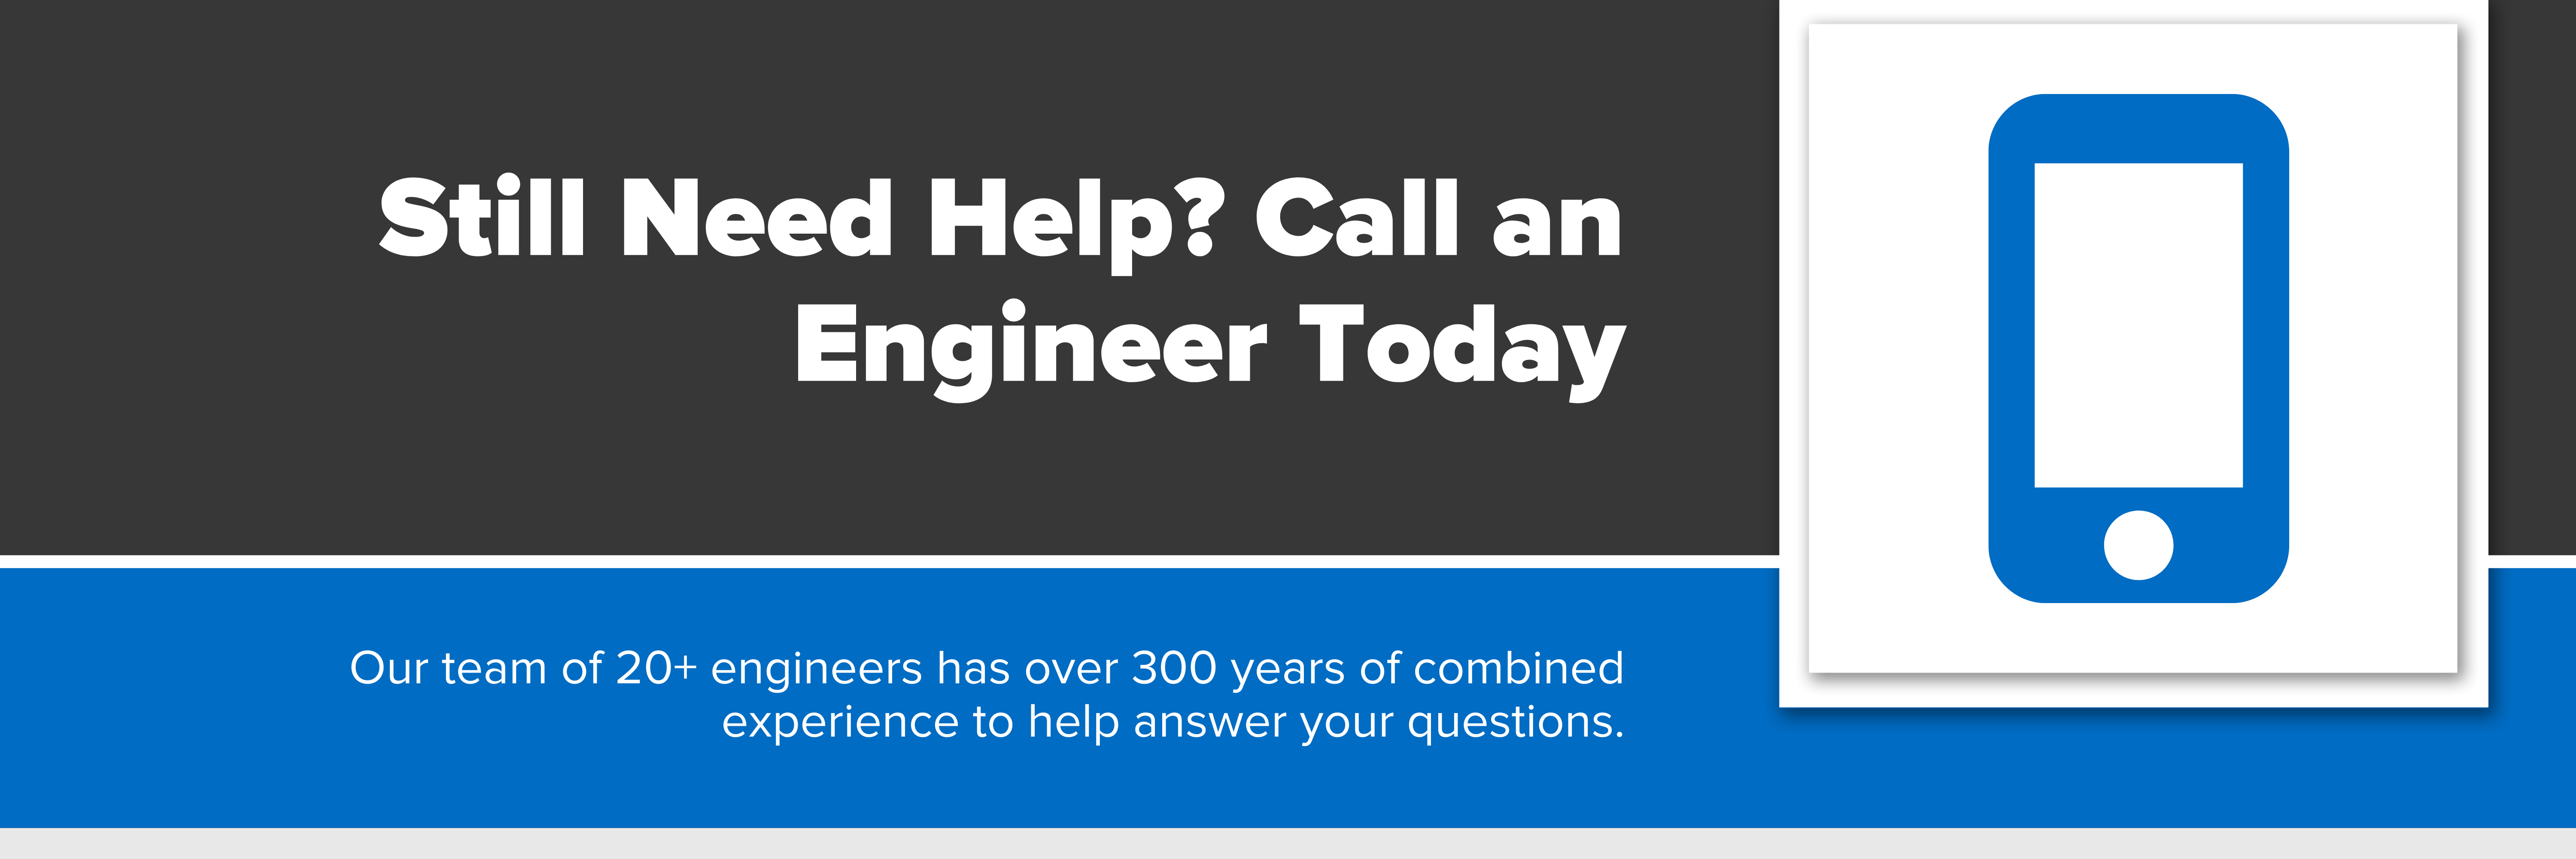 Header image with text "Still need help? Call an engineer today"